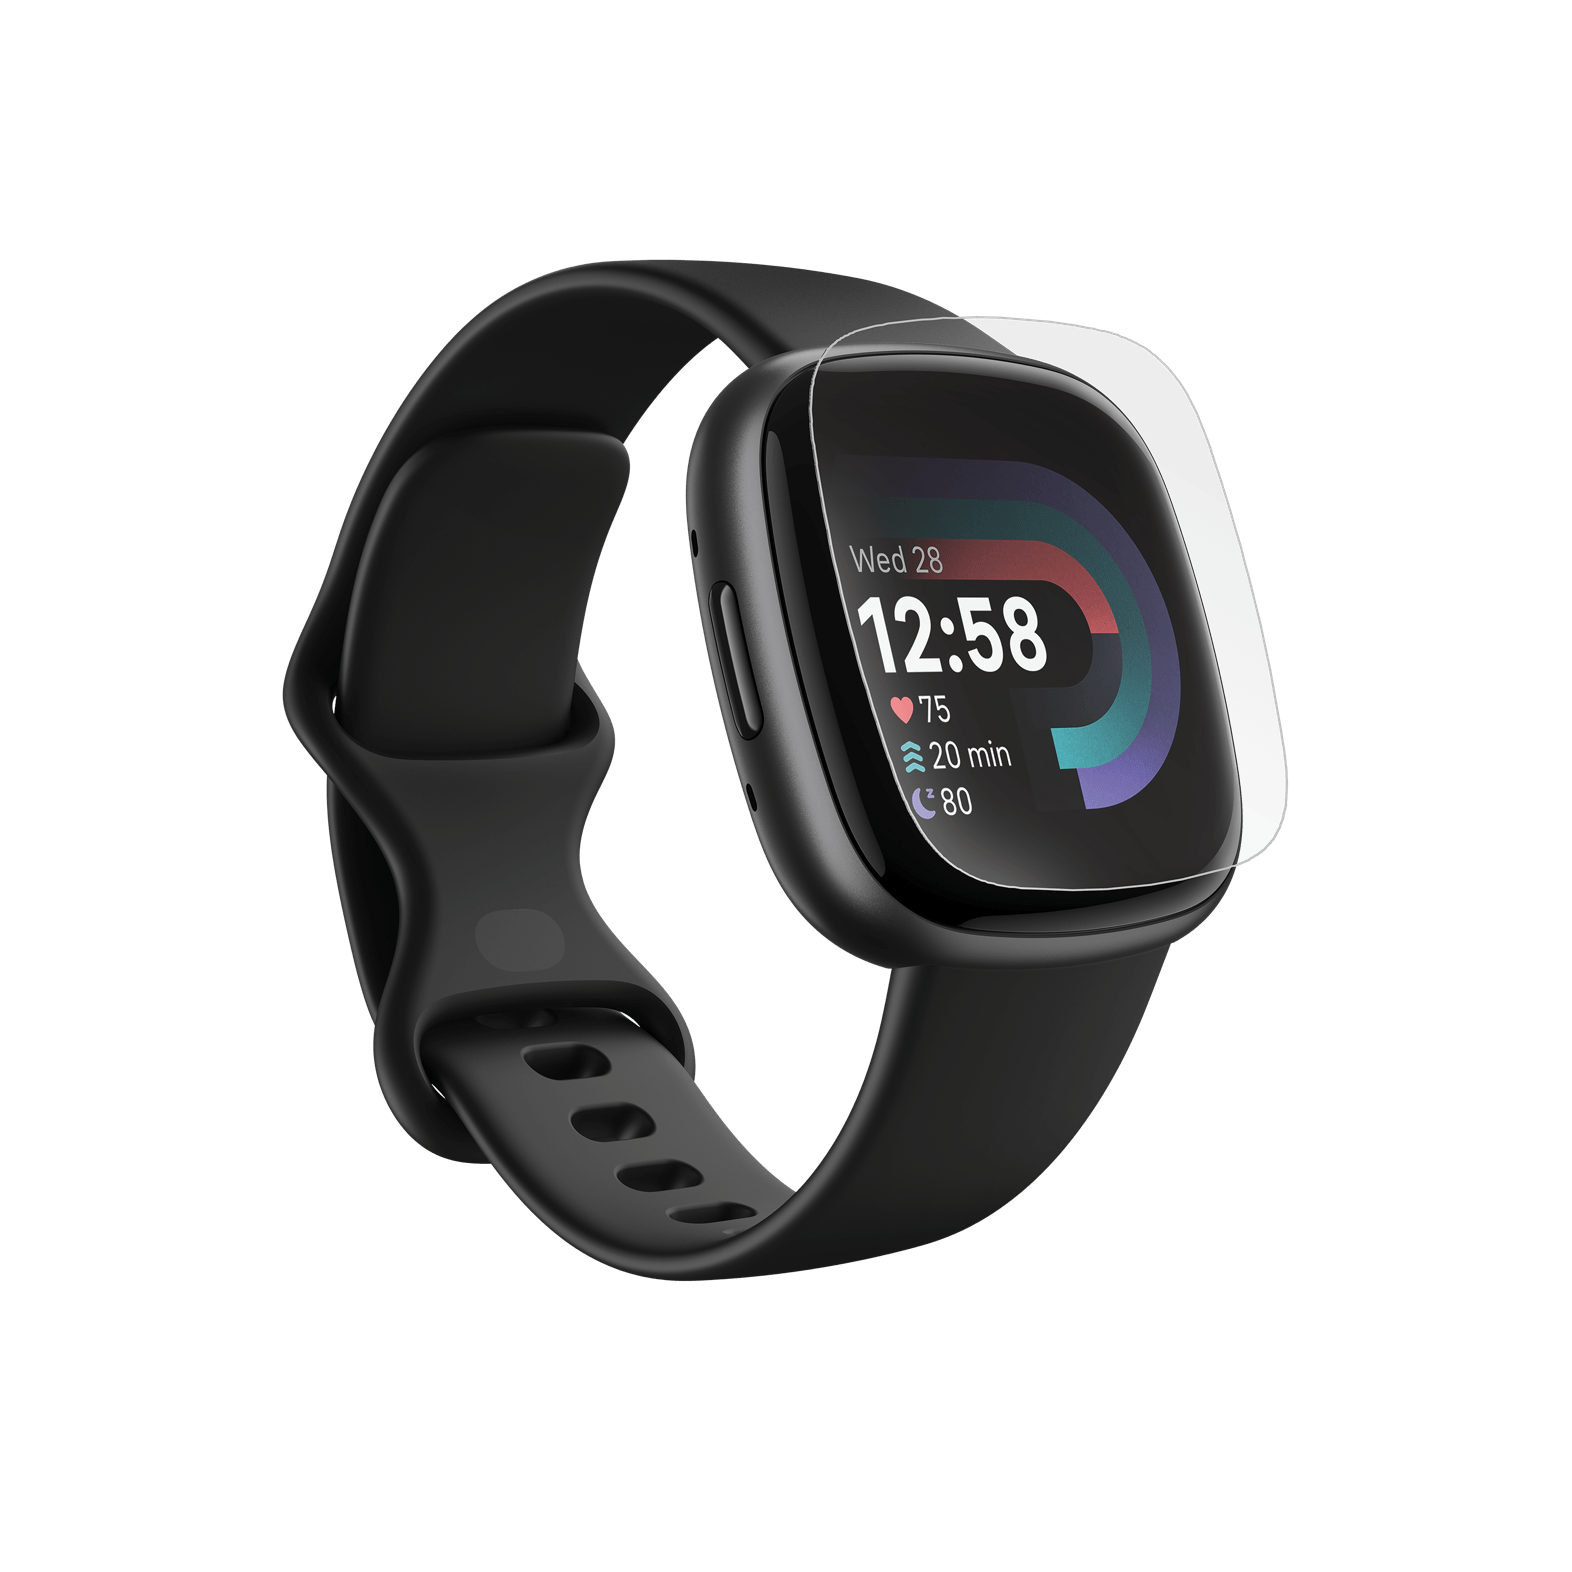 Smartwatch Screen Protector | Shop Made for Fitbit Accessories